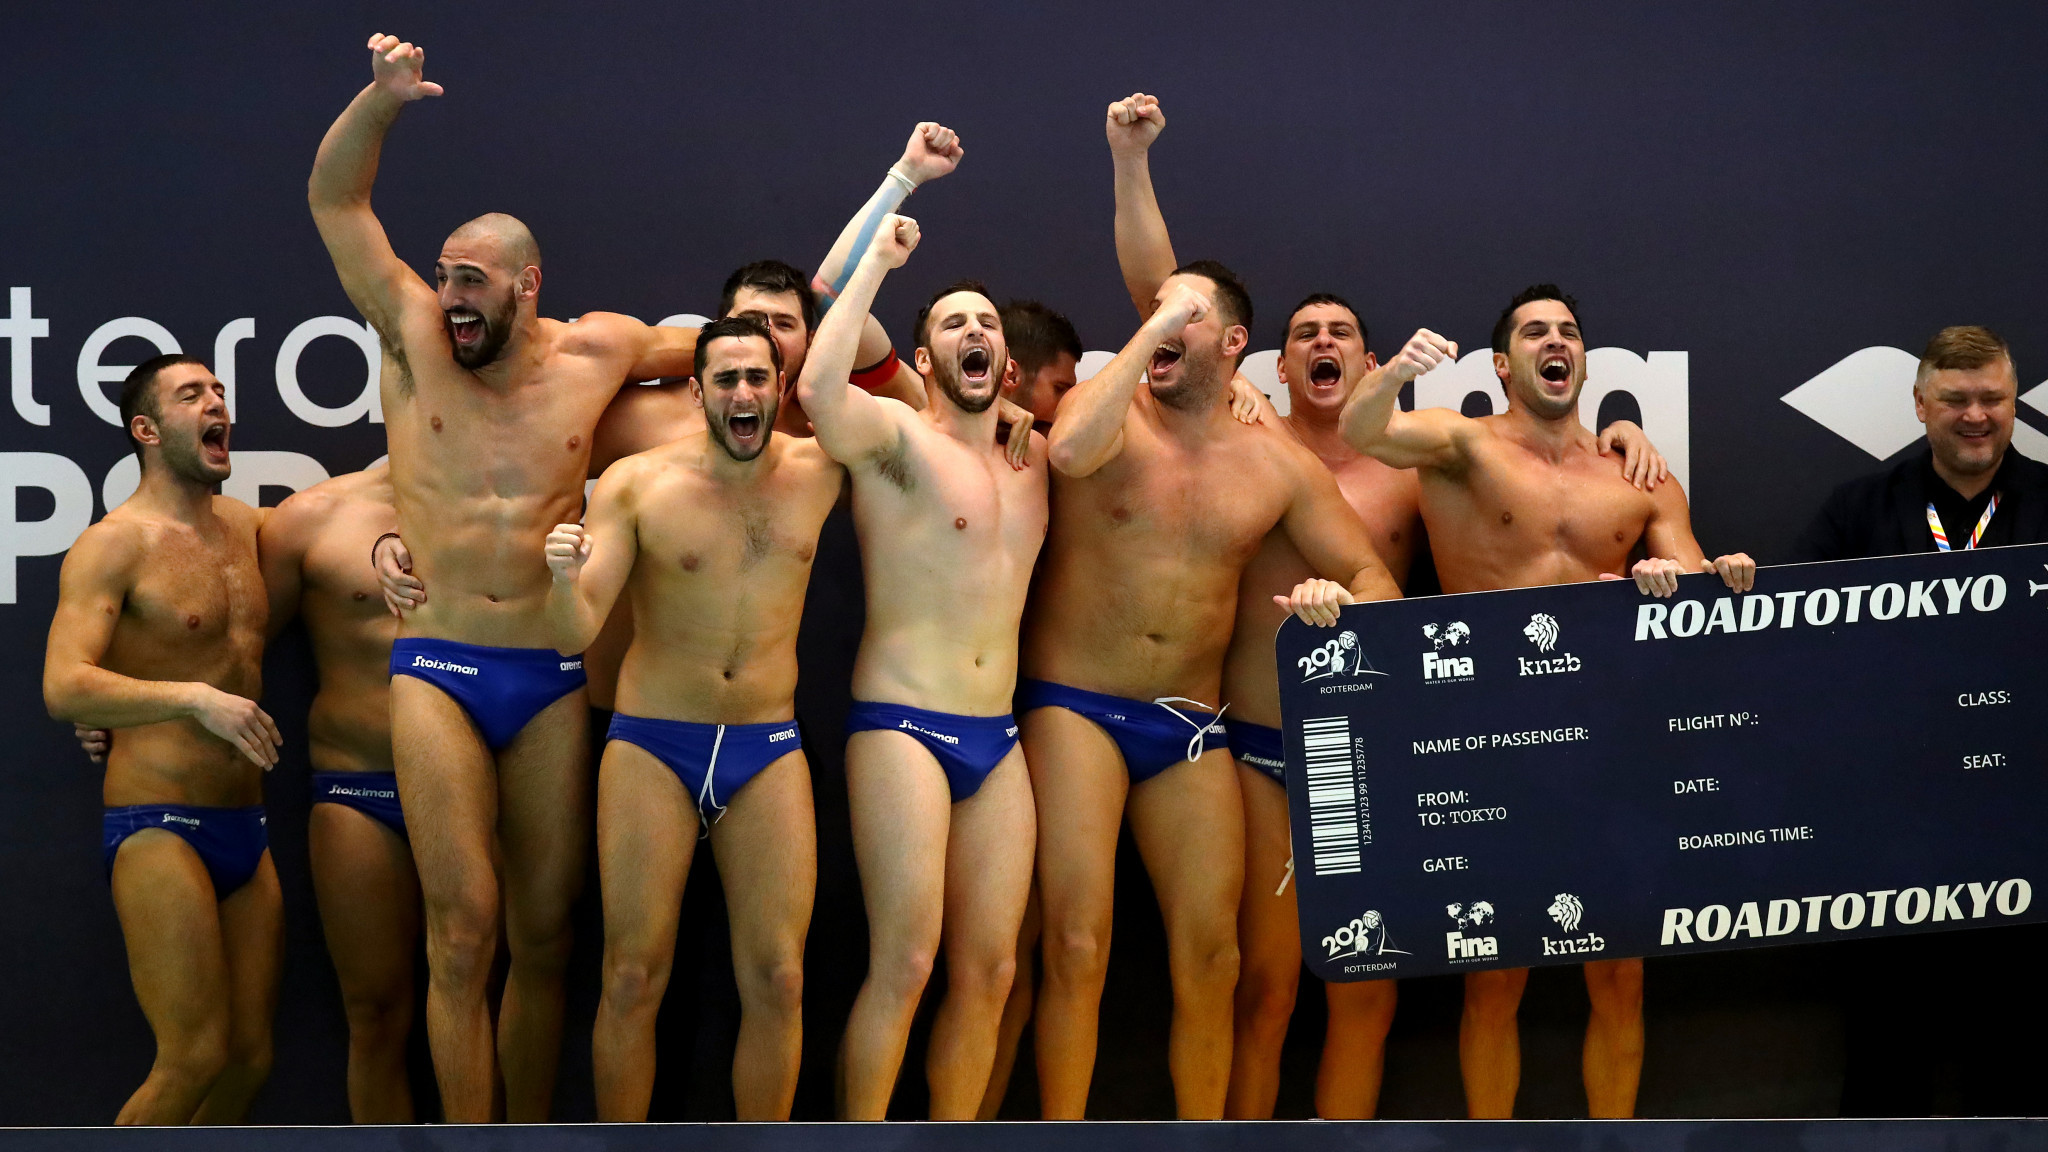 Barber lawyer anniversary Montenegro and Greece reach Tokyo 2020 water polo tournament